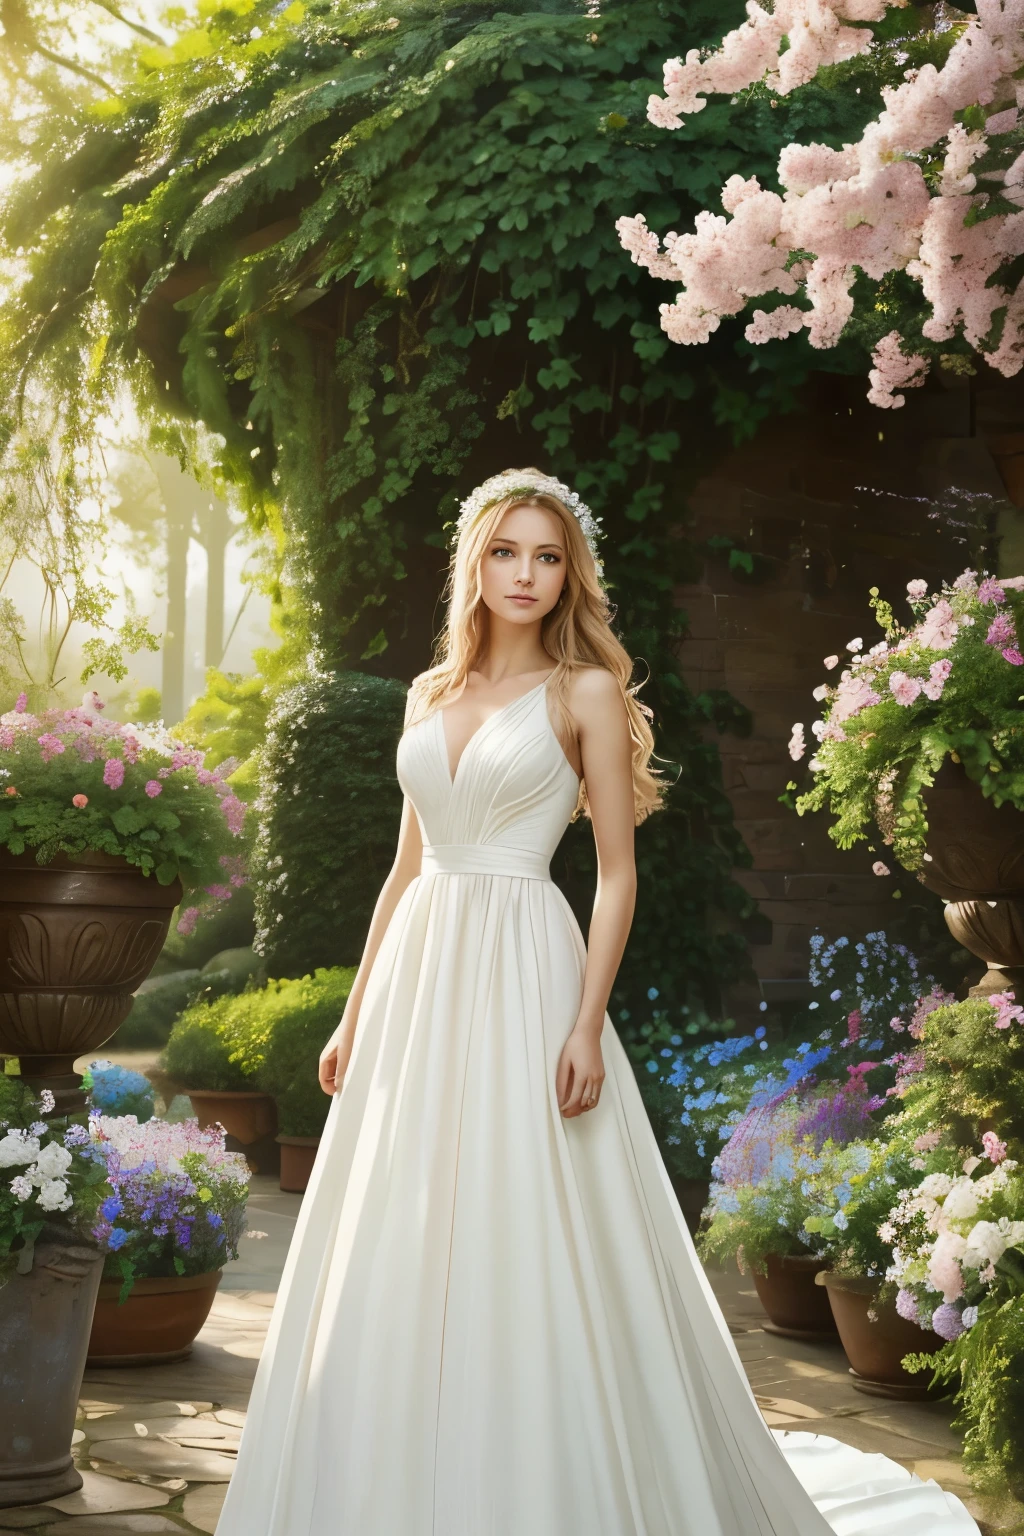 A girl with flowing golden hair and mesmerizing blue eyes, wearing an elegant white dress, standing in the midst of a vibrant garden filled with blooming flowers and lush greenery. The sunlight gently illuminates her delicate features, casting a soft glow on her flawless skin. She holds a delicate butterfly in her hand, while a gentle breeze swirls around her, causing the flowers to dance in harmony. The scene is captured in a breathtaking oil painting, with every detail meticulously crafted to create a masterpiece. The colors are vibrant and vivid, with a hint of ethereal pastel tones, giving the artwork a dreamlike quality. The lighting is soft and diffused, creating a serene and tranquil ambiance. The high-resolution image showcases the artist's impeccable skill, capturing every intricate detail with precision. The overall atmosphere exudes a sense of beauty, grace, and enchantment. The artwork is reminiscent of classical portraits, with a touch of fantasy and whimsy, evoking emotions of wonder and awe.